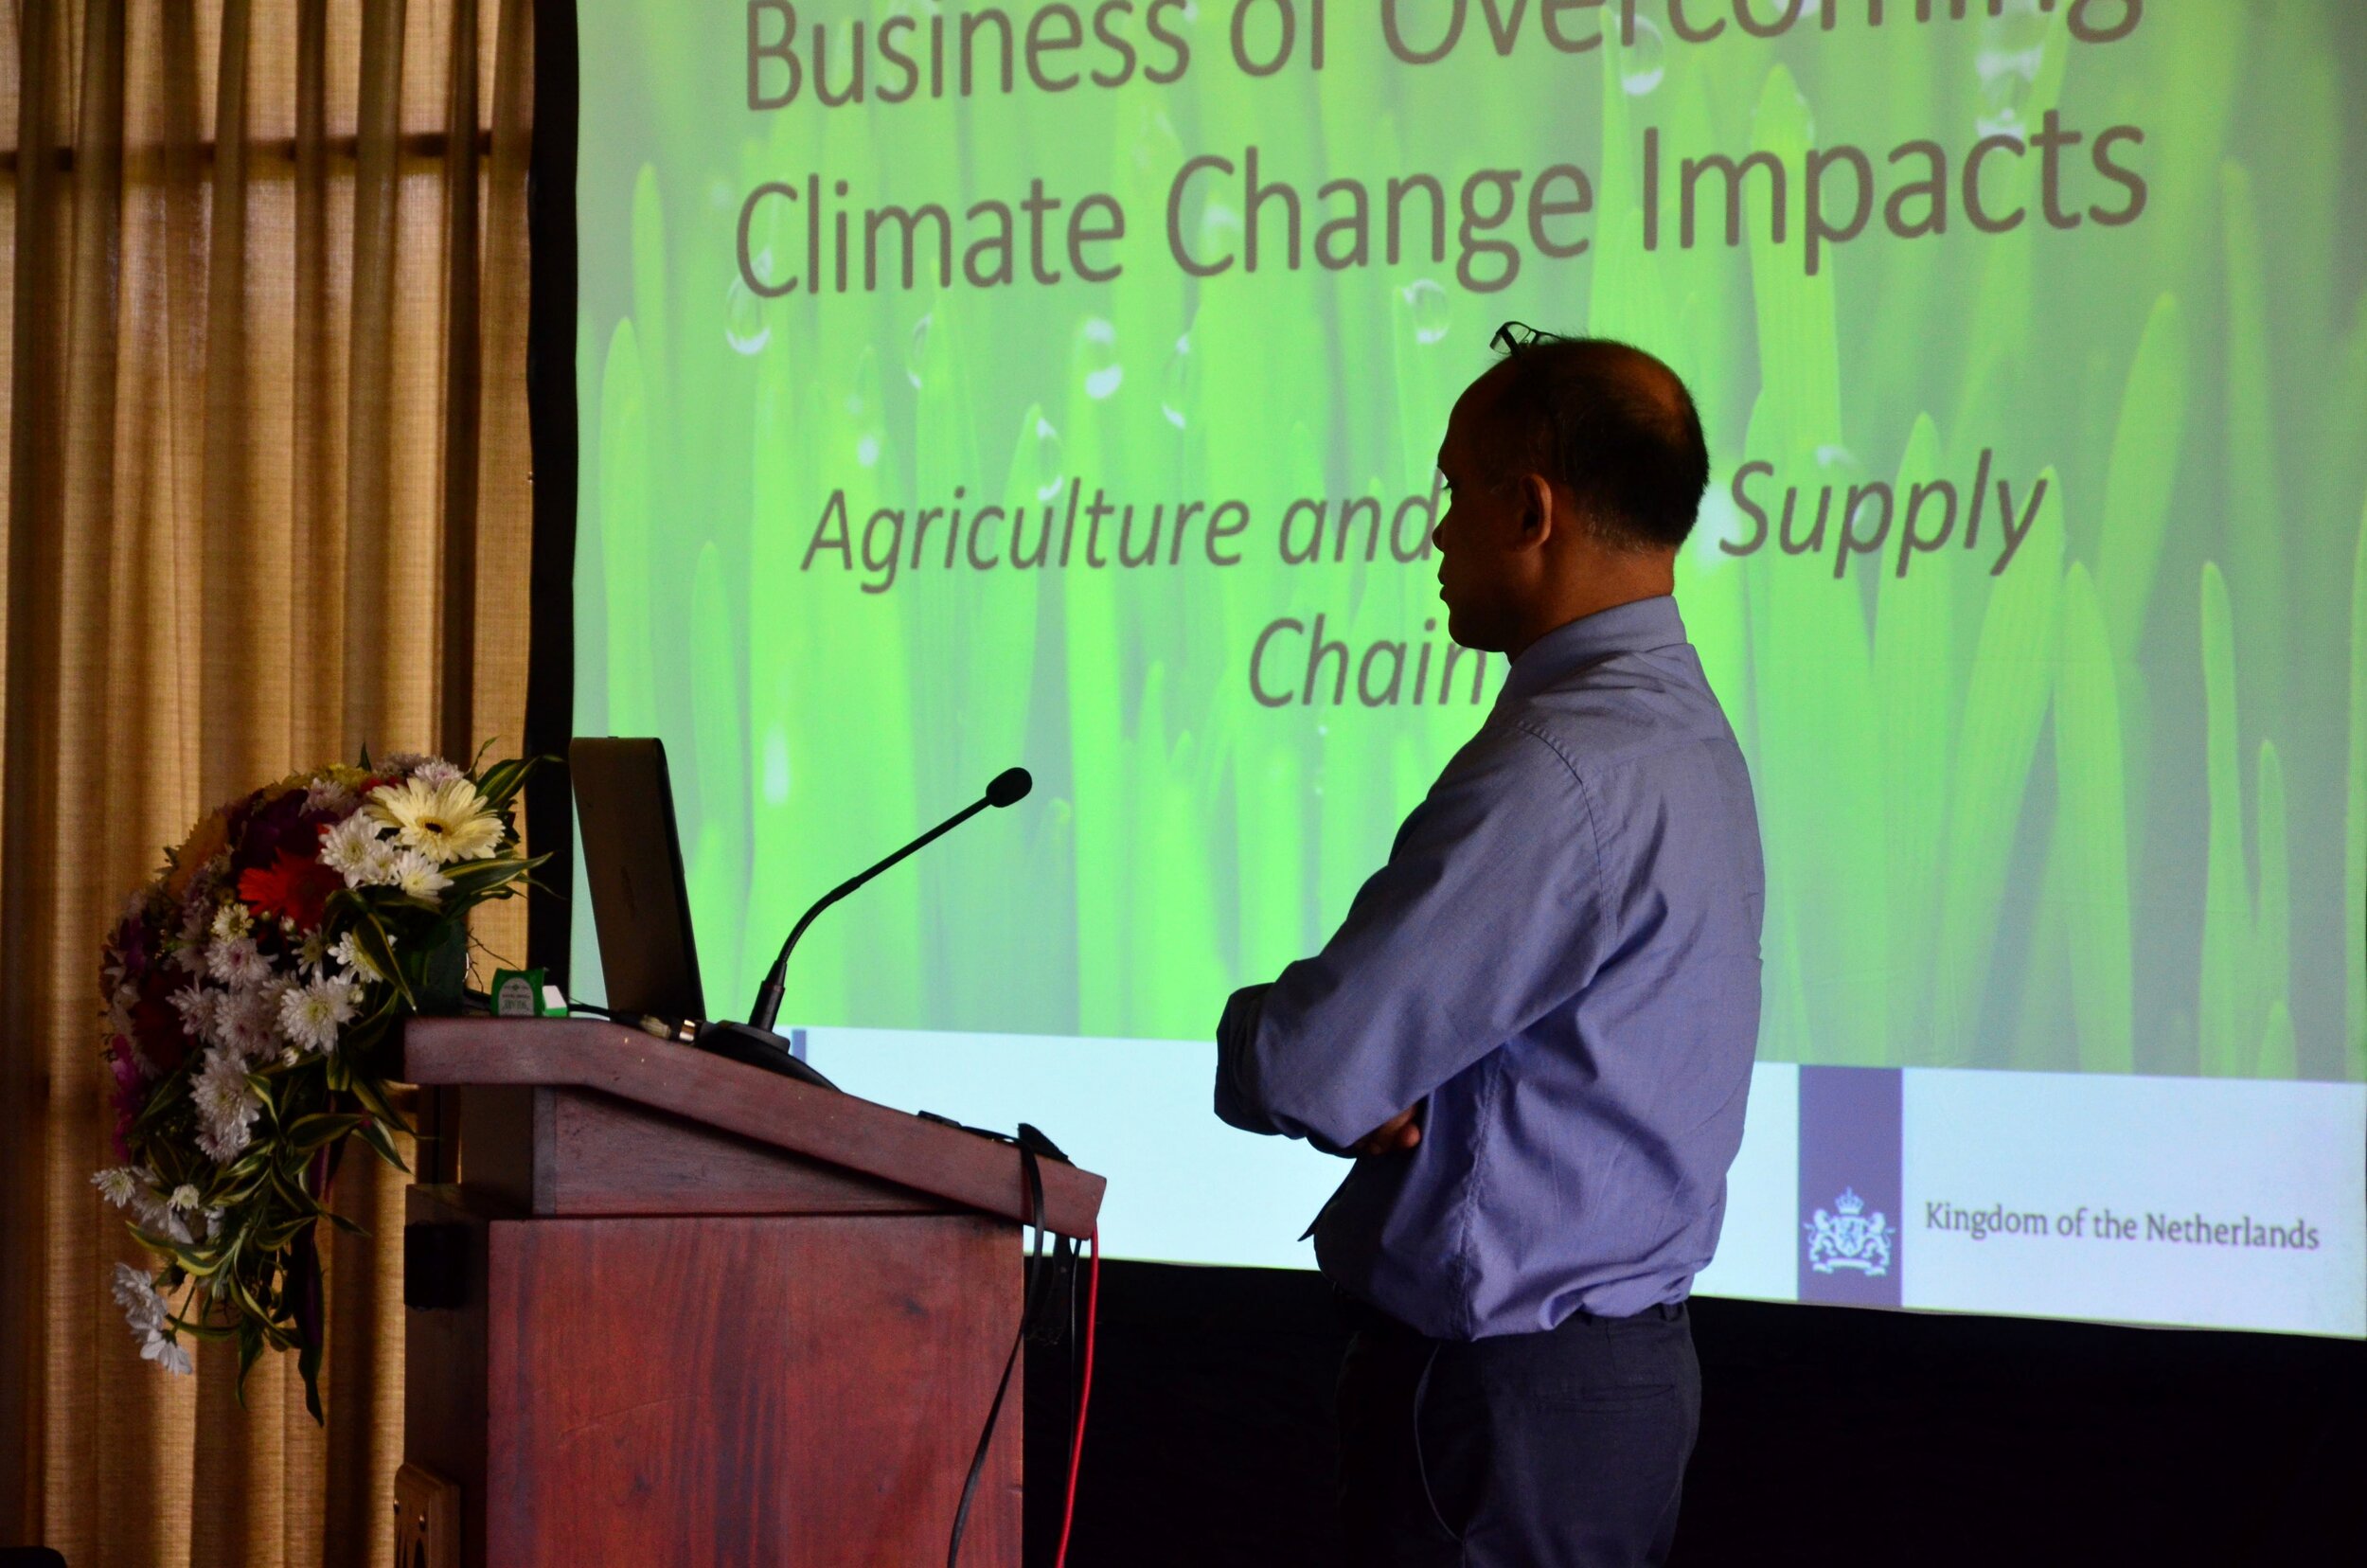 Business of overcoming climate change impacts, Dutch Embassy